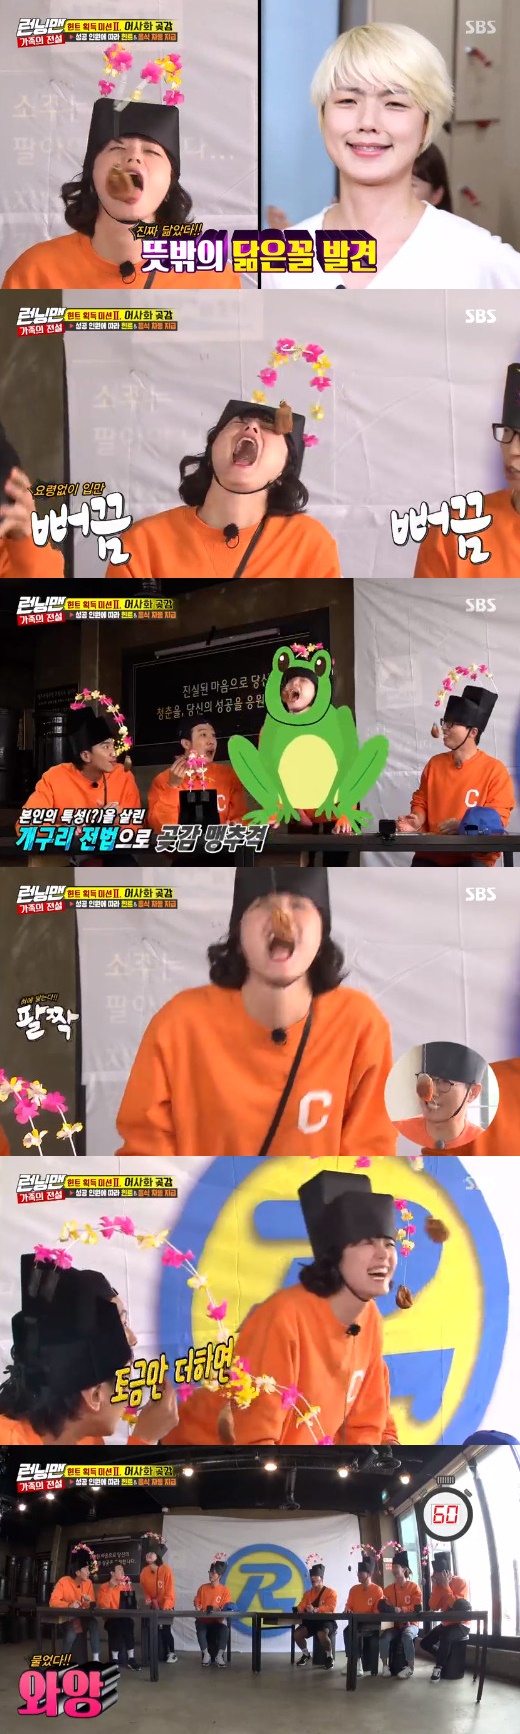 Actor Jeon So-min has become a gag woman Ahn Young Mi resemblance in Running Man.On SBS Running Man broadcasted on the afternoon of the 11th, a special feature of Dangerous Family was drawn.On this day, the members were destroyed to obtain hints. They attempted to eat dried persimmons on the fish.Among them, Jeon So-min found an unexpected resemblance to his face and laughed.Members watched Jeon So-min try the mission, and shouted It resembles Ahn Young Mi.In addition, Jeon So-min added a laugh by showing the Frogs method with lips cringing and puffing.